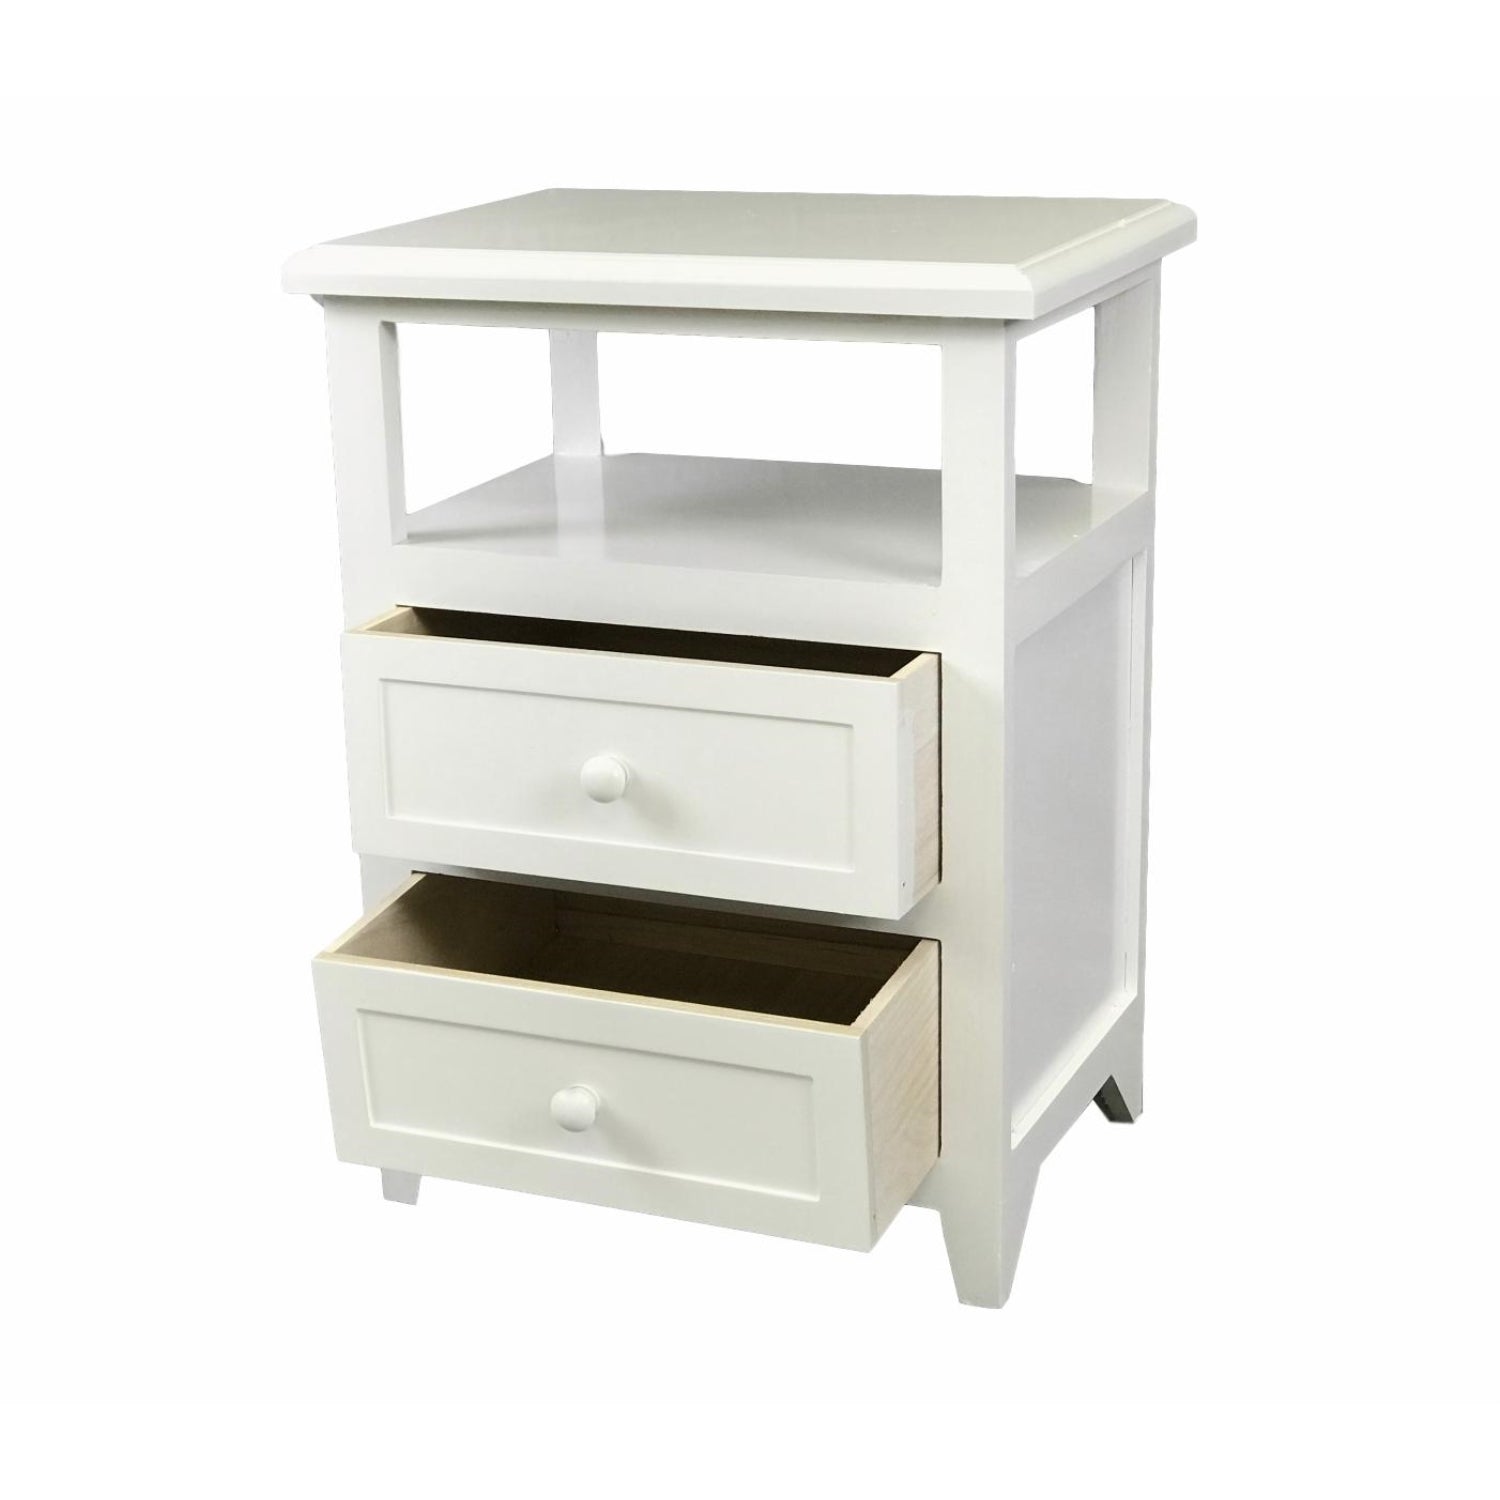 ViscoLogic Glady Night Stand, End Table with Shelf Cabinet and Drawers Storage (White)